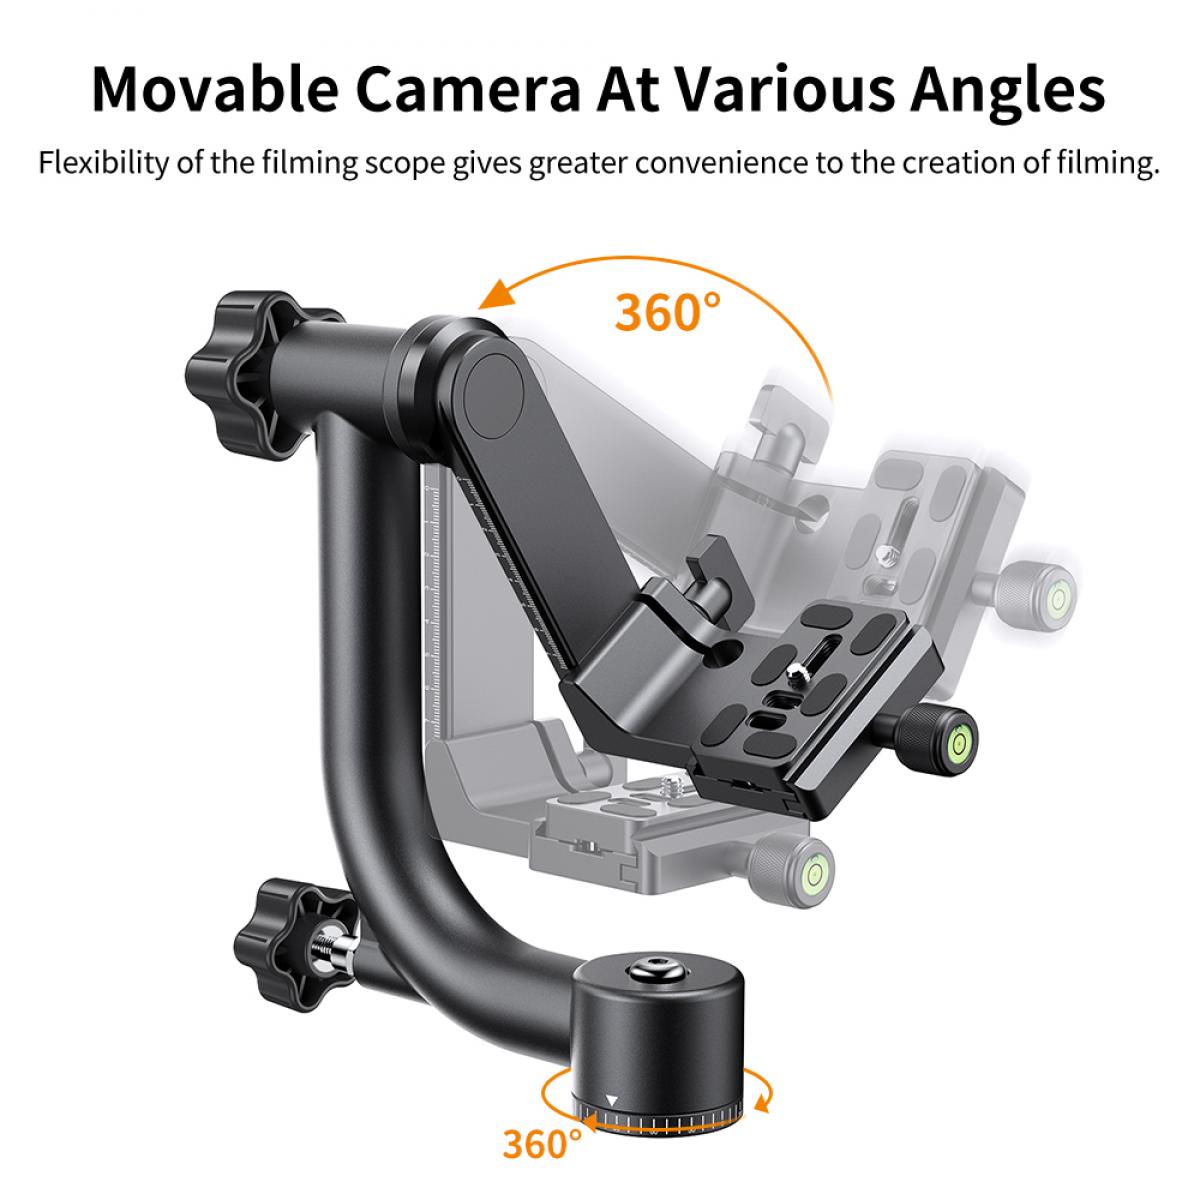 K&F Concept Heavy Duty Aluminum Gimbal Tripod Head with 20kg Load Capacity, 360 Rotation, 1/4" Quick Release Plate for Photography Filming Equipment